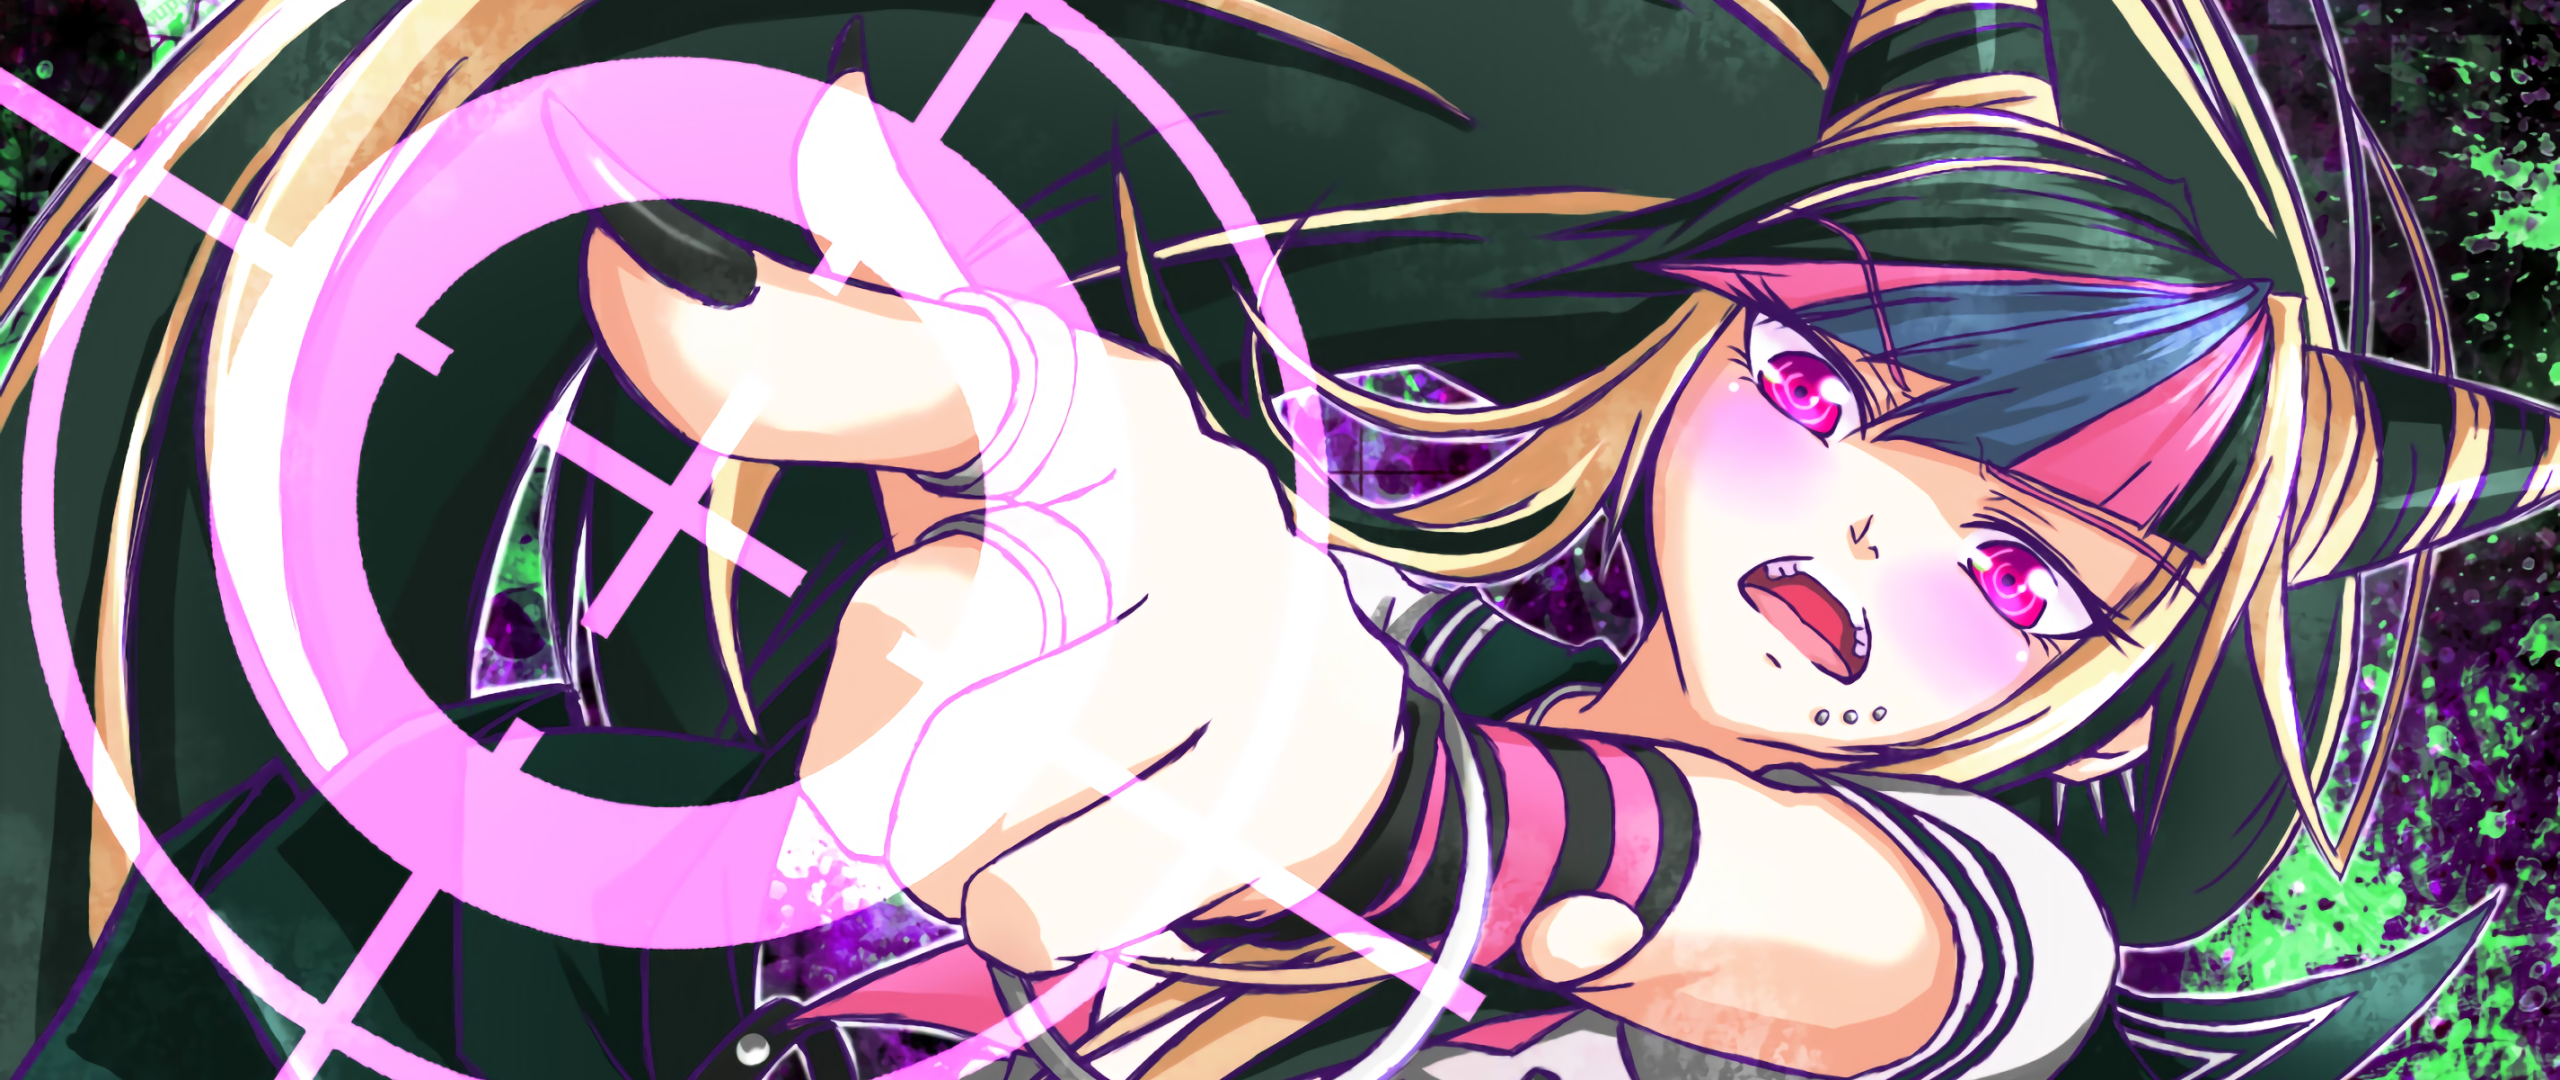 Anime 2560x1080 Danganronpa anime girls pink eyes anime open mouth fingers black nails angry face